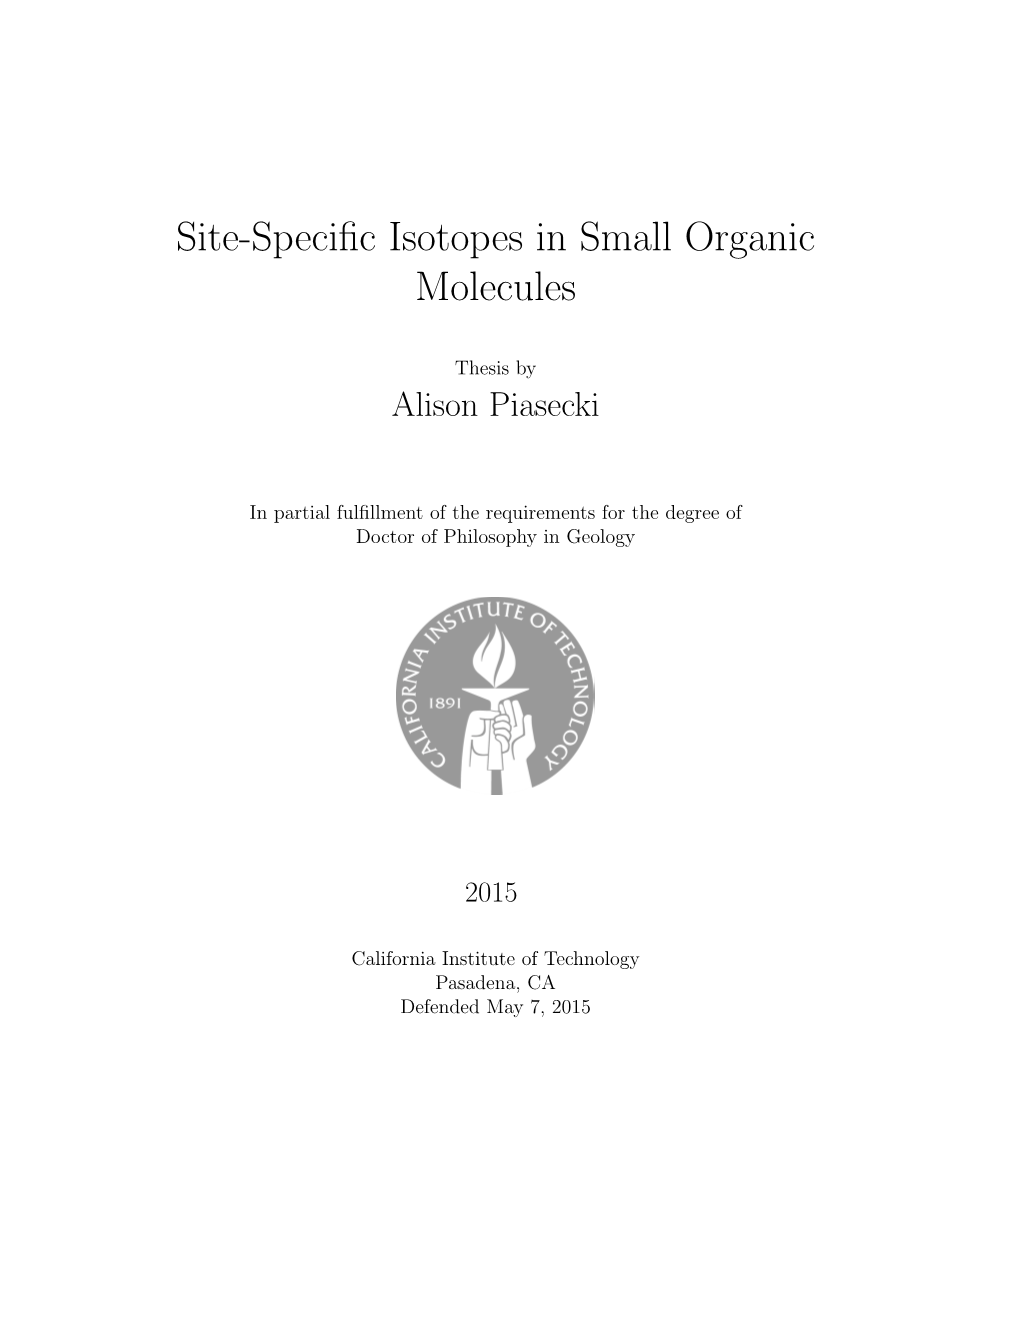 Site-Specific Isotopes in Small Organic Molecules